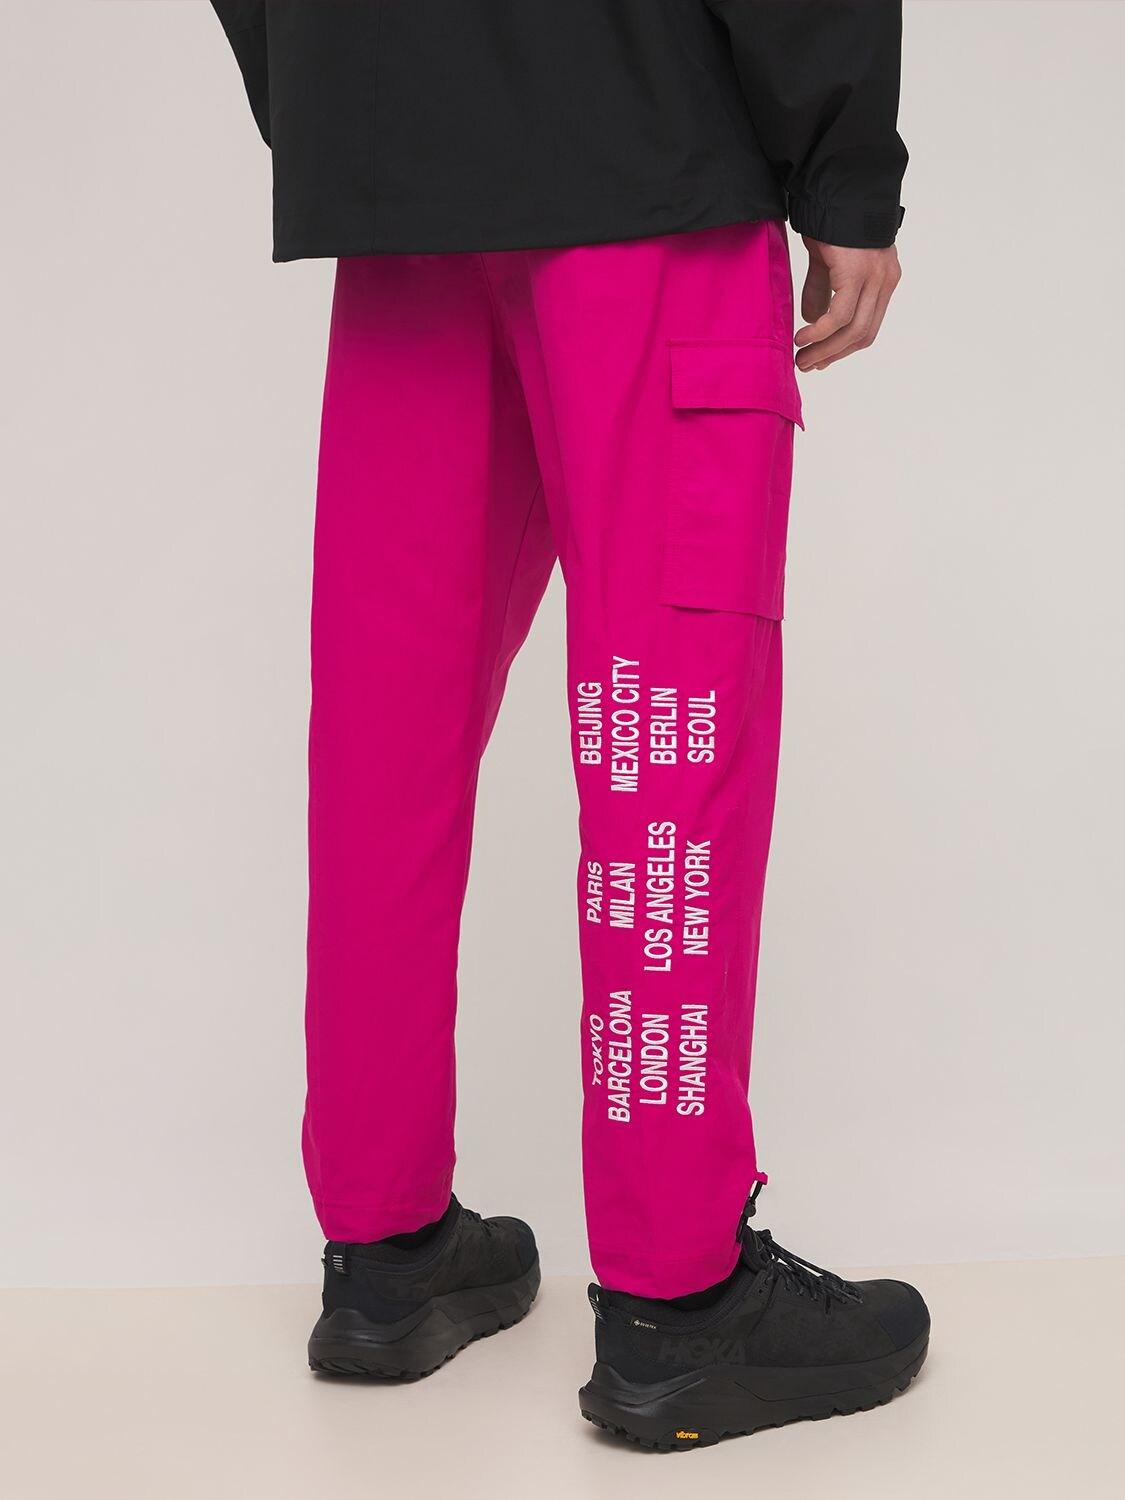 Nike World Tour Woven Cargo Pants in Pink for Men